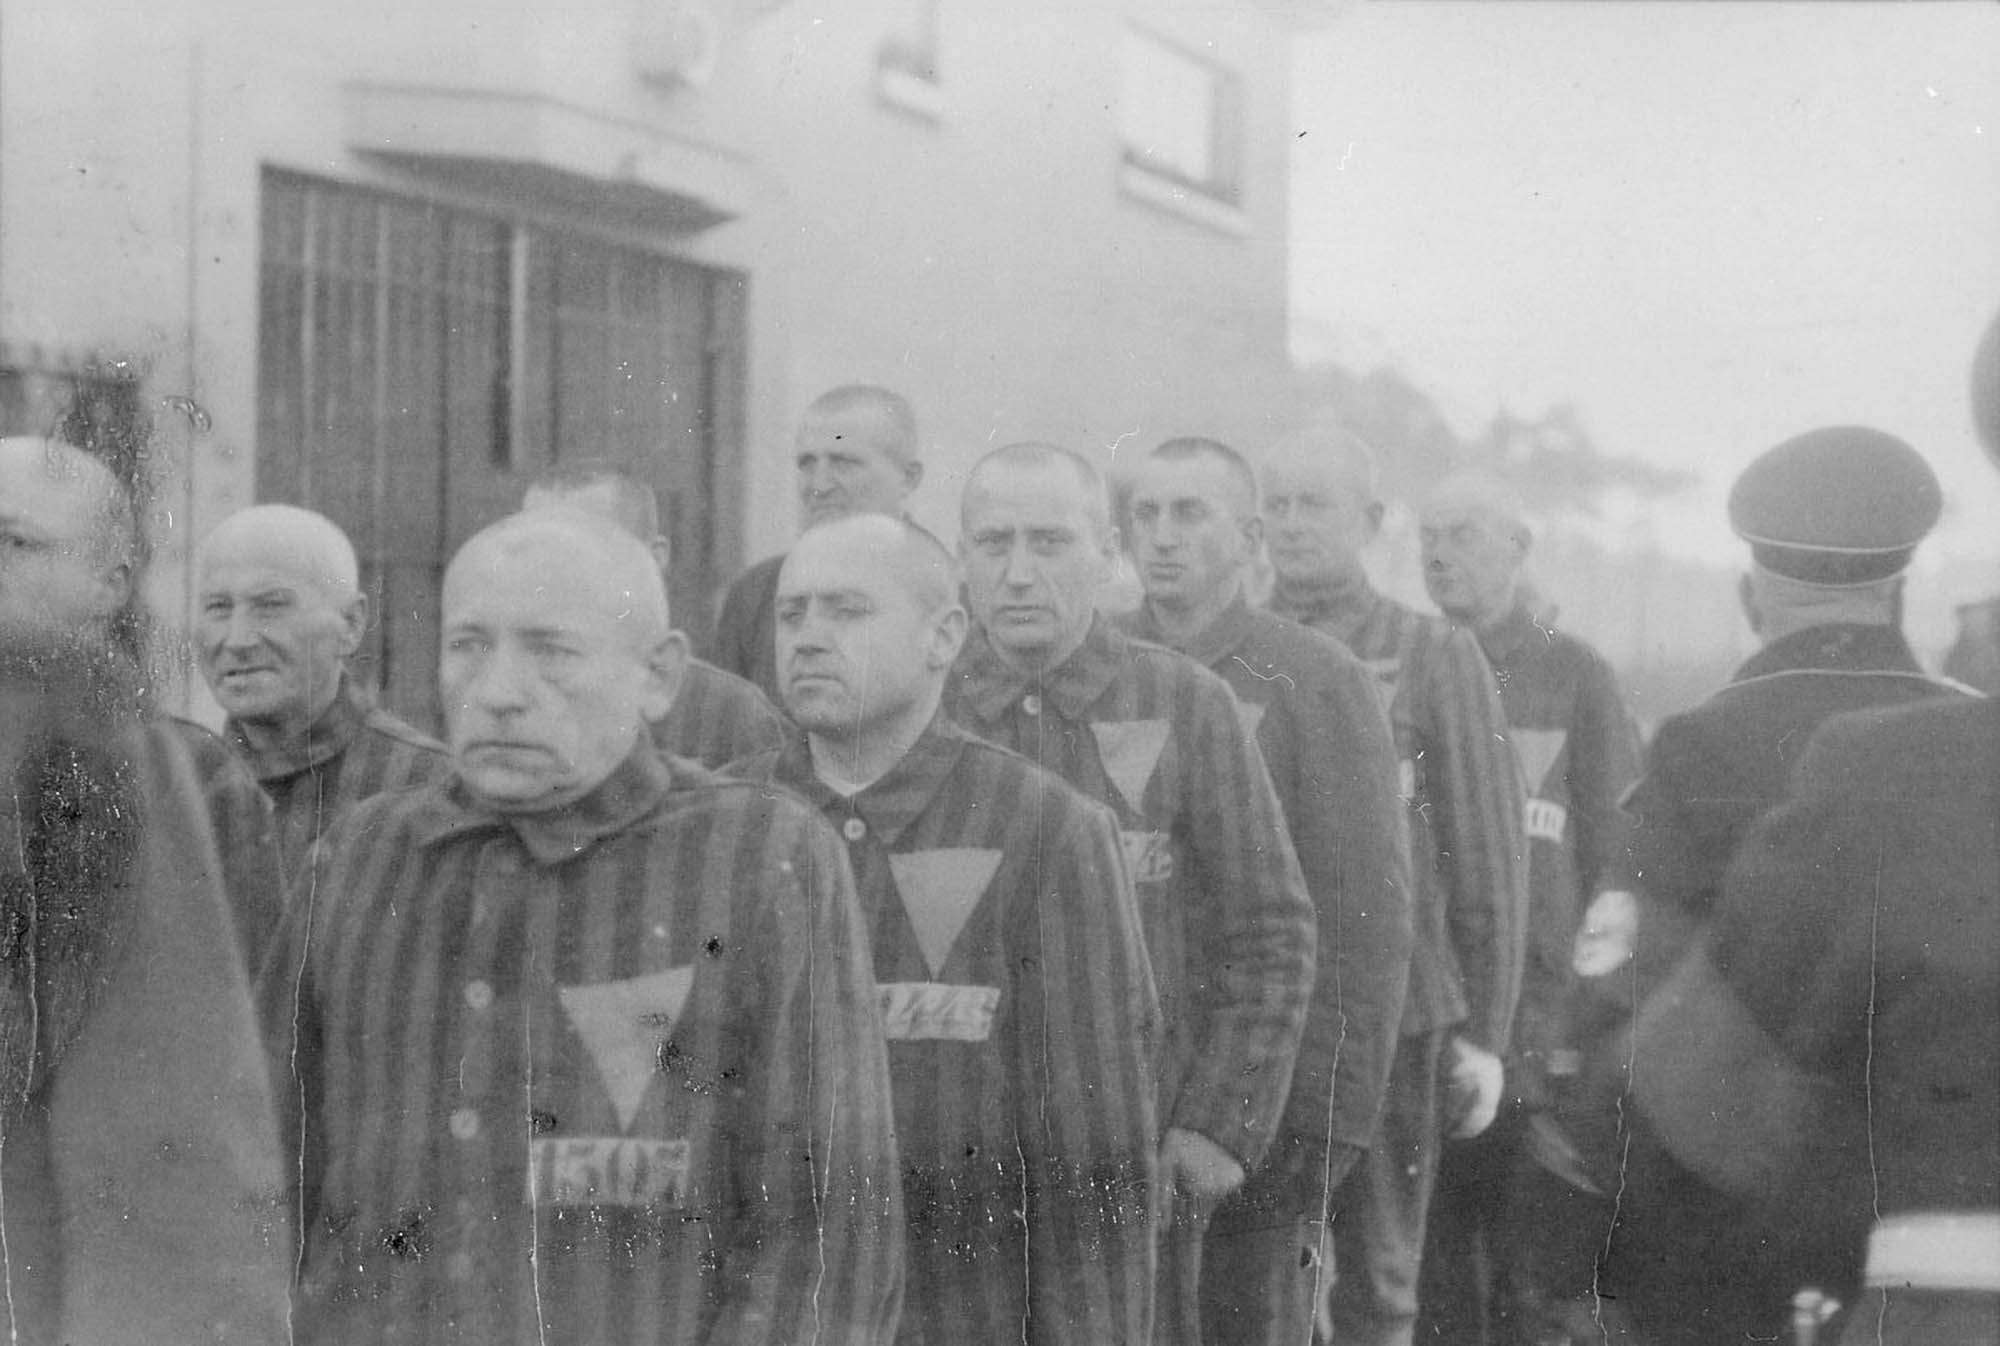 Nazi Camp Guard Aged 99 Charged With Being Accessory To Murder Of More Than 3,300 Holocaust Victims